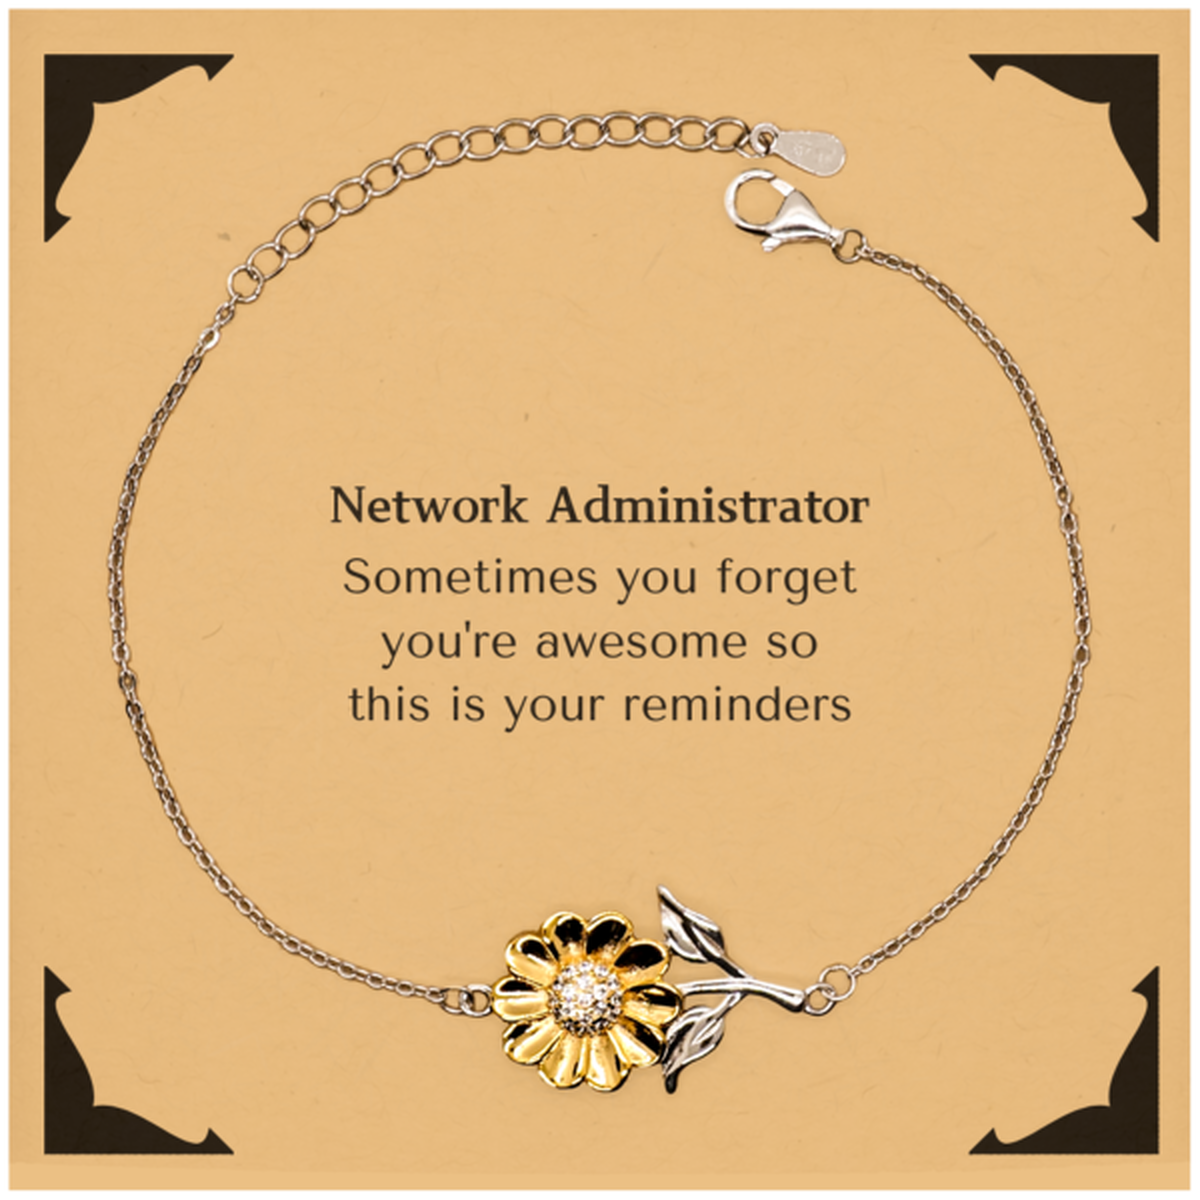 Sentimental Network Administrator Sunflower Bracelet, Network Administrator Sometimes you forget you're awesome so this is your reminders, Graduation Christmas Birthday Gifts for Network Administrator, Men, Women, Coworkers